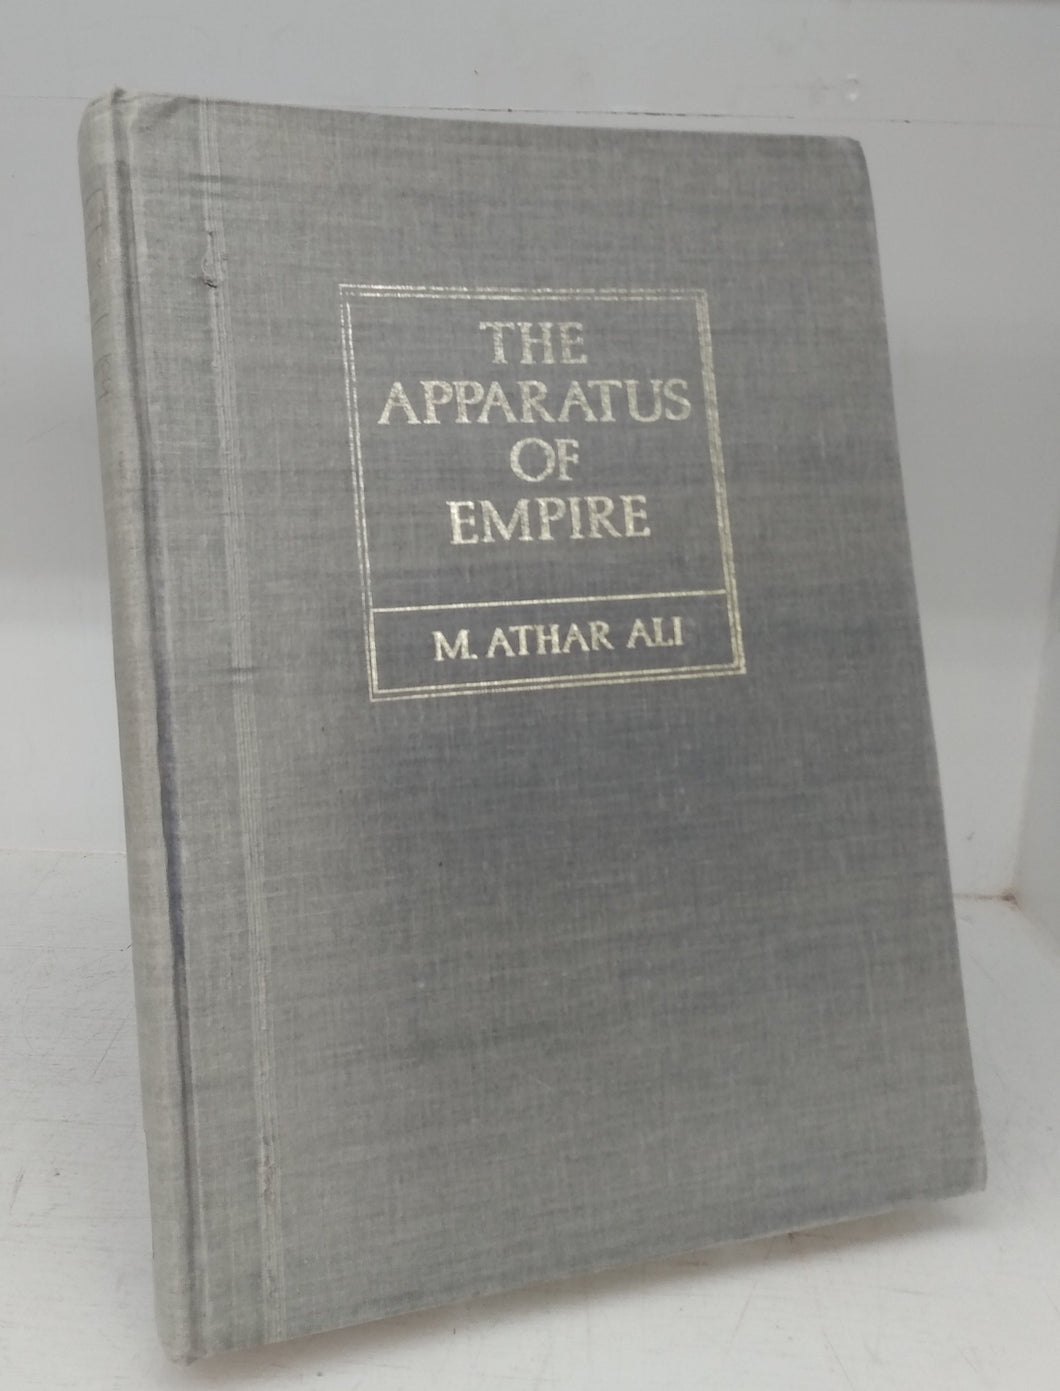 The Apparatus of Empire: Awards of Ranks, Offices and Titles to the Mughal Nobility (1574-1658)